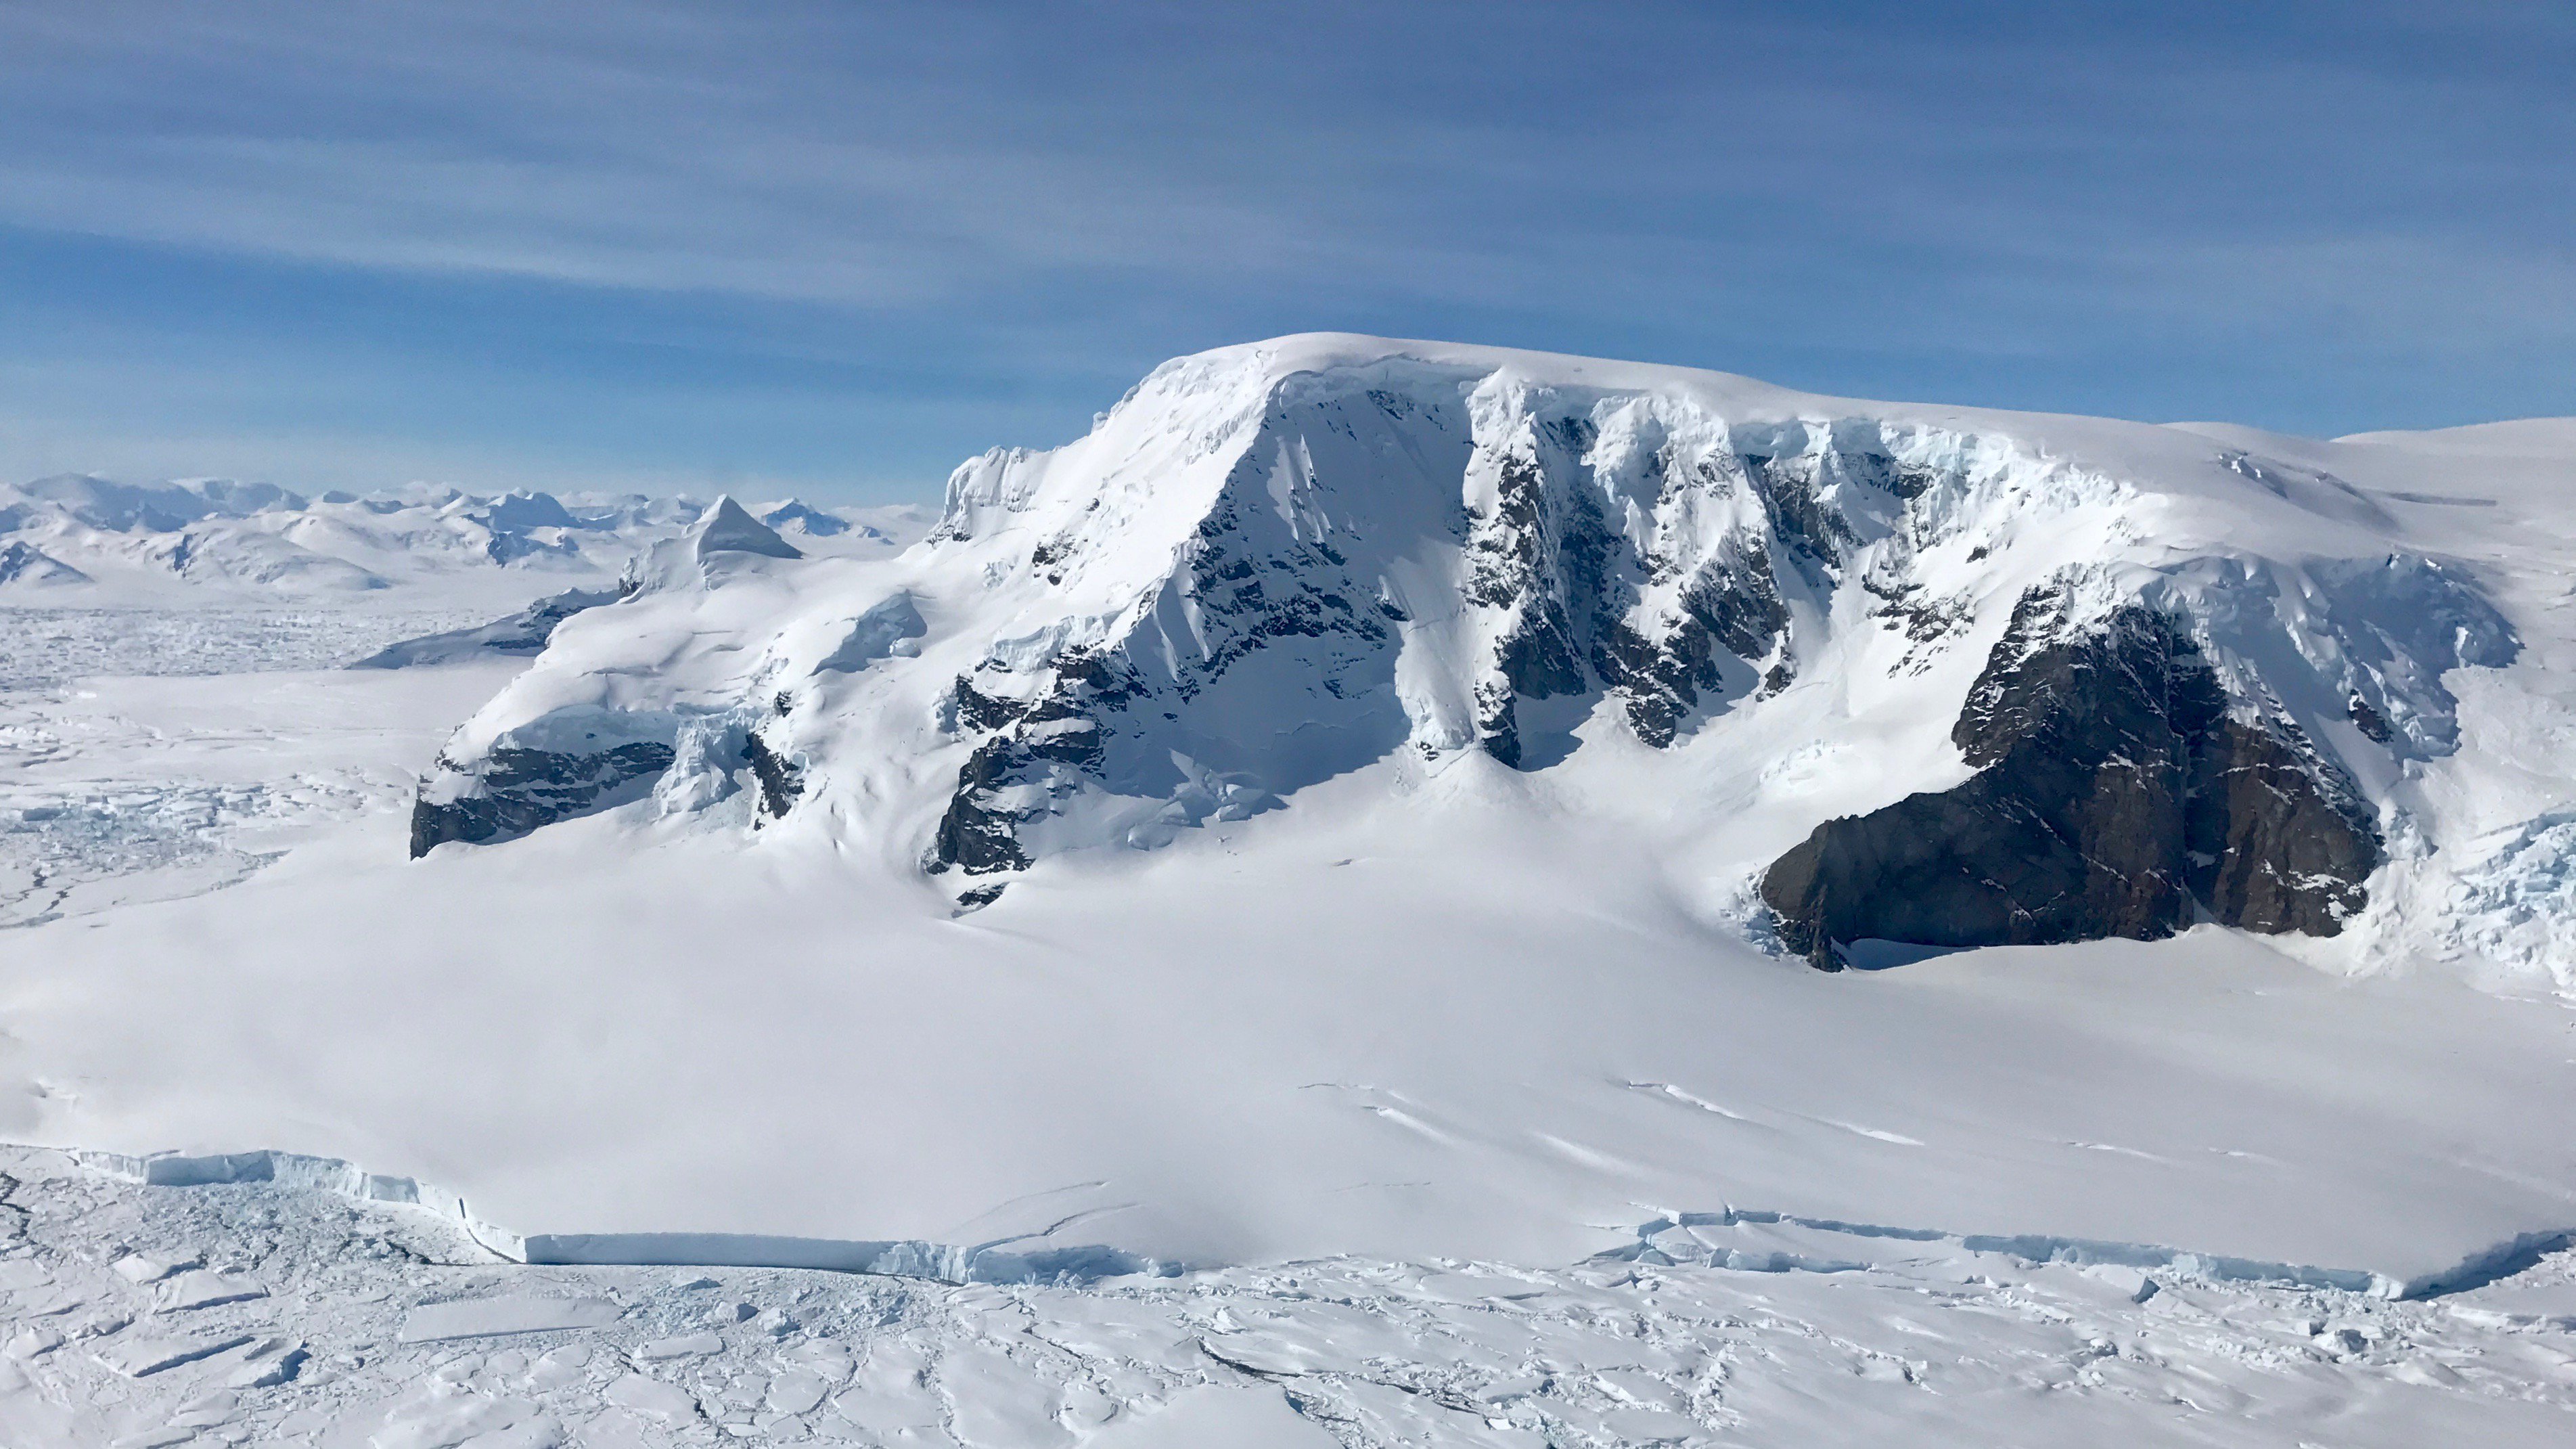 An aerial view of the mountains in Antarctica